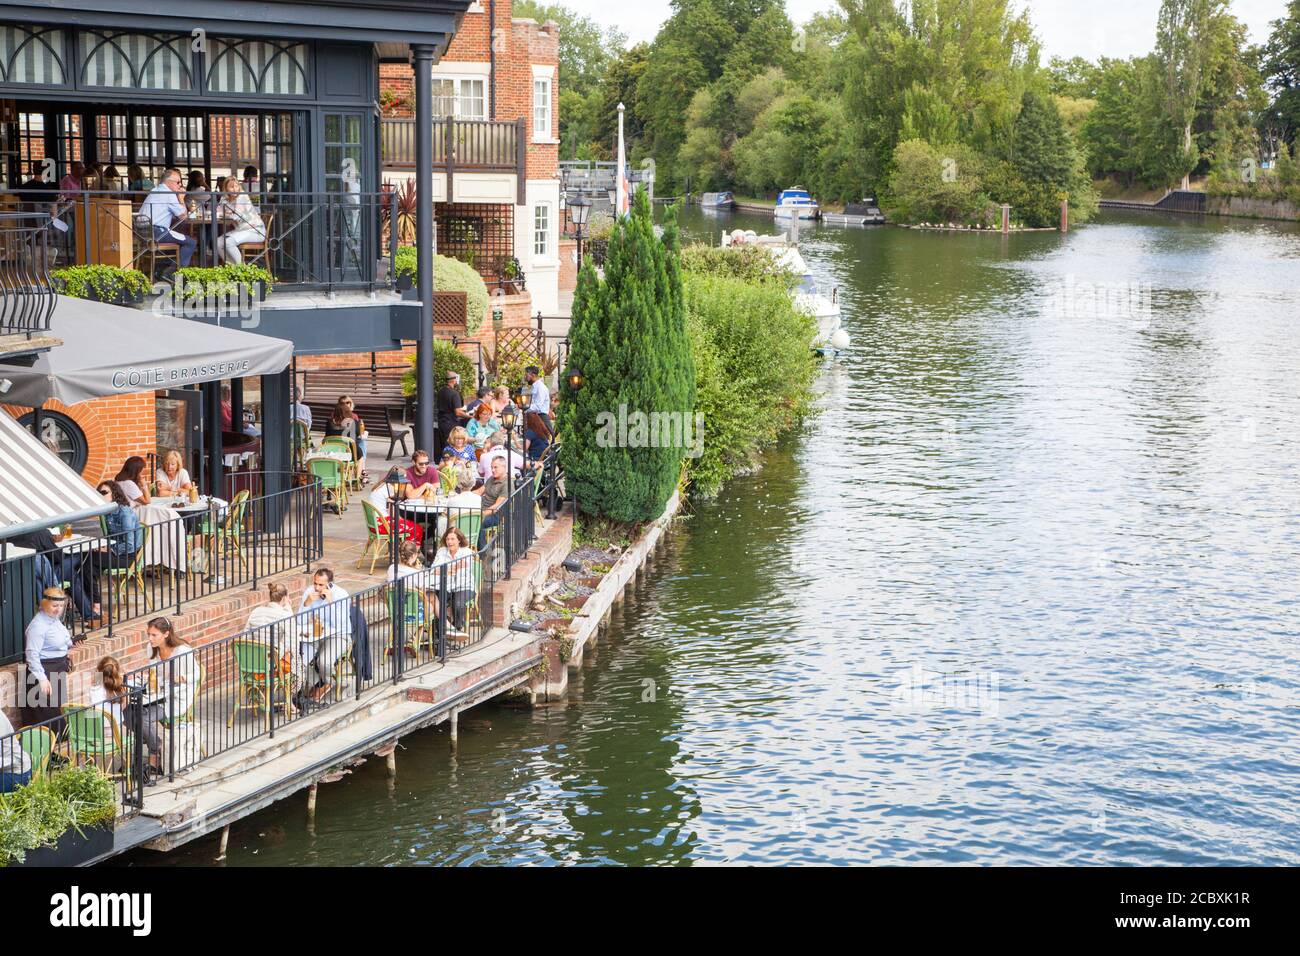 Dinners at the Cote brasserie riverside restaurant eating and drinking outside on the river Thames at Windsor and Eton England UK Stock Photo